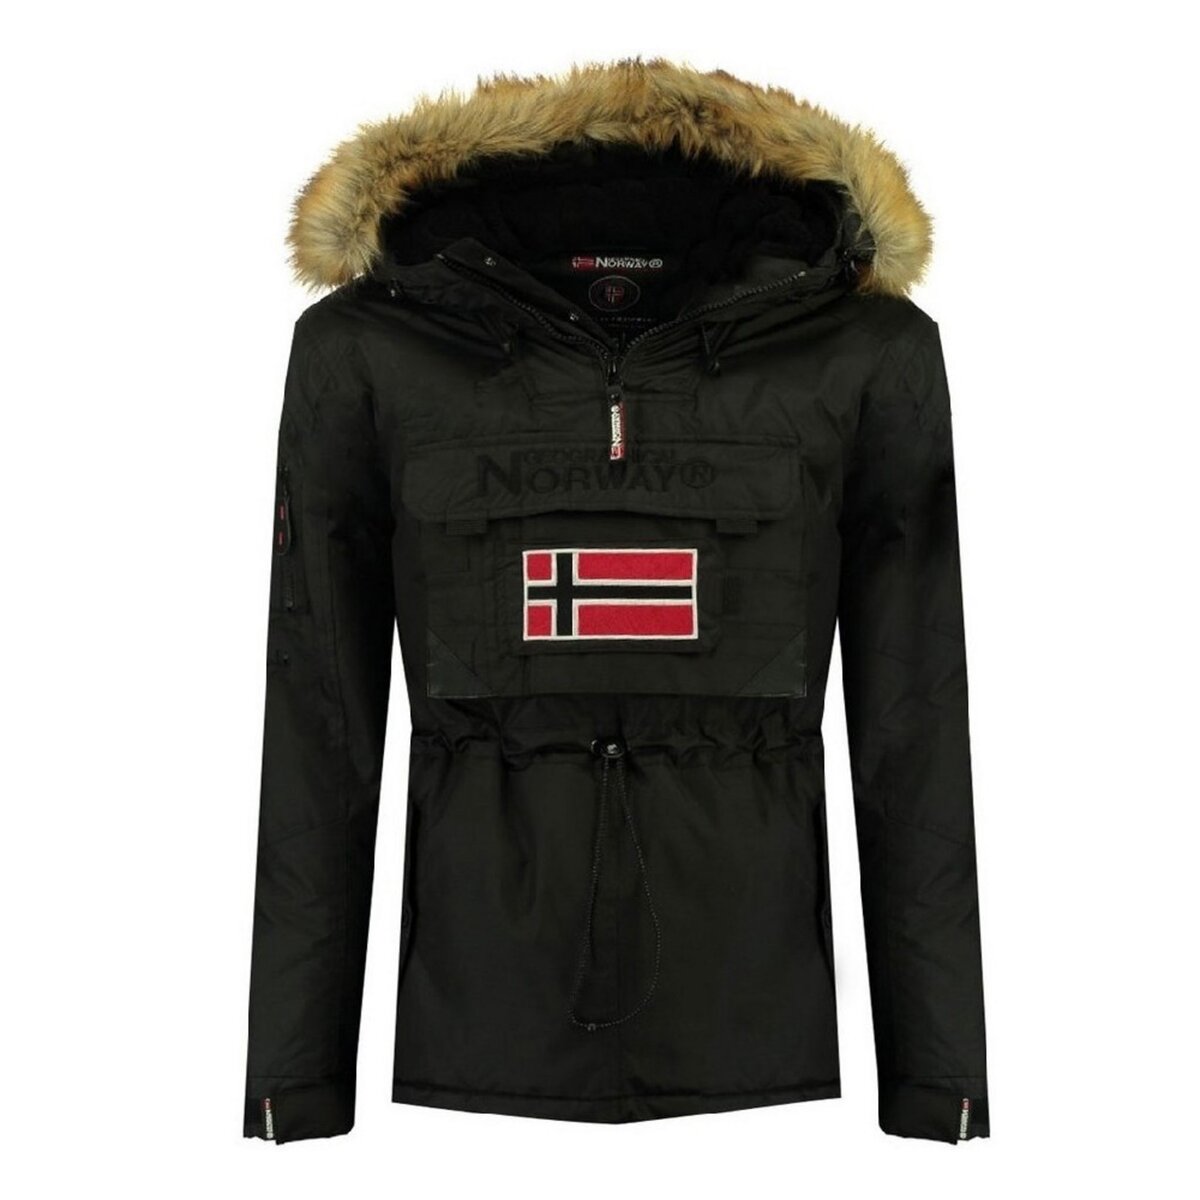 GEOGRAPHICAL NORWAY Parka Noir Garçon Geographical Norway Barbier